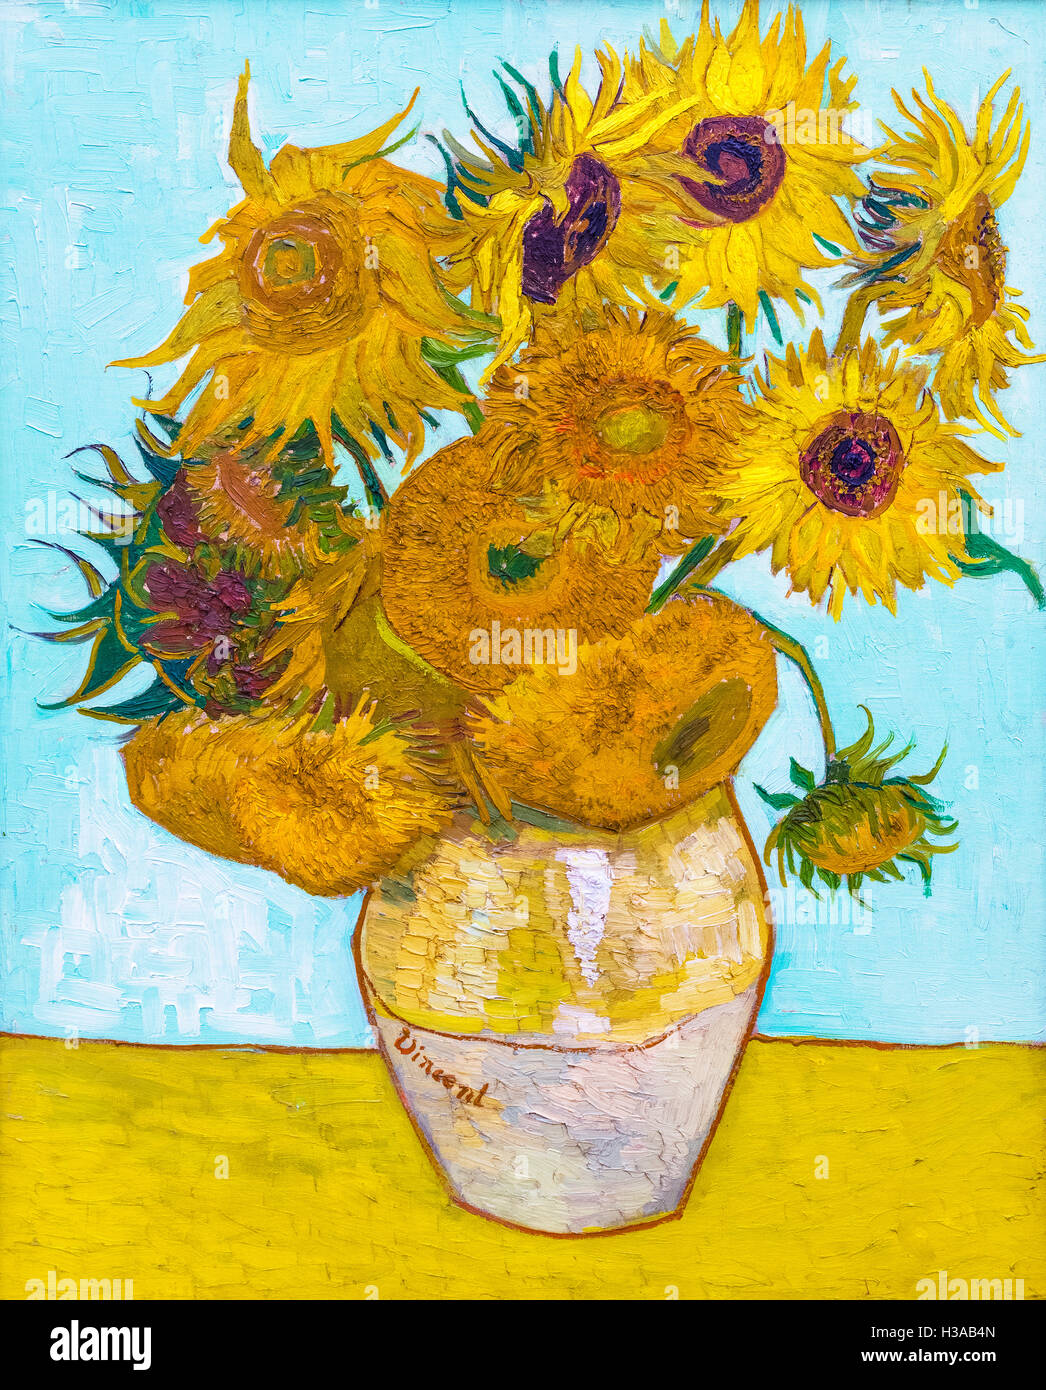 Sunflowers by Vincent van Gogh (1853-1890), oil on canvas, 1888, Stock Photo